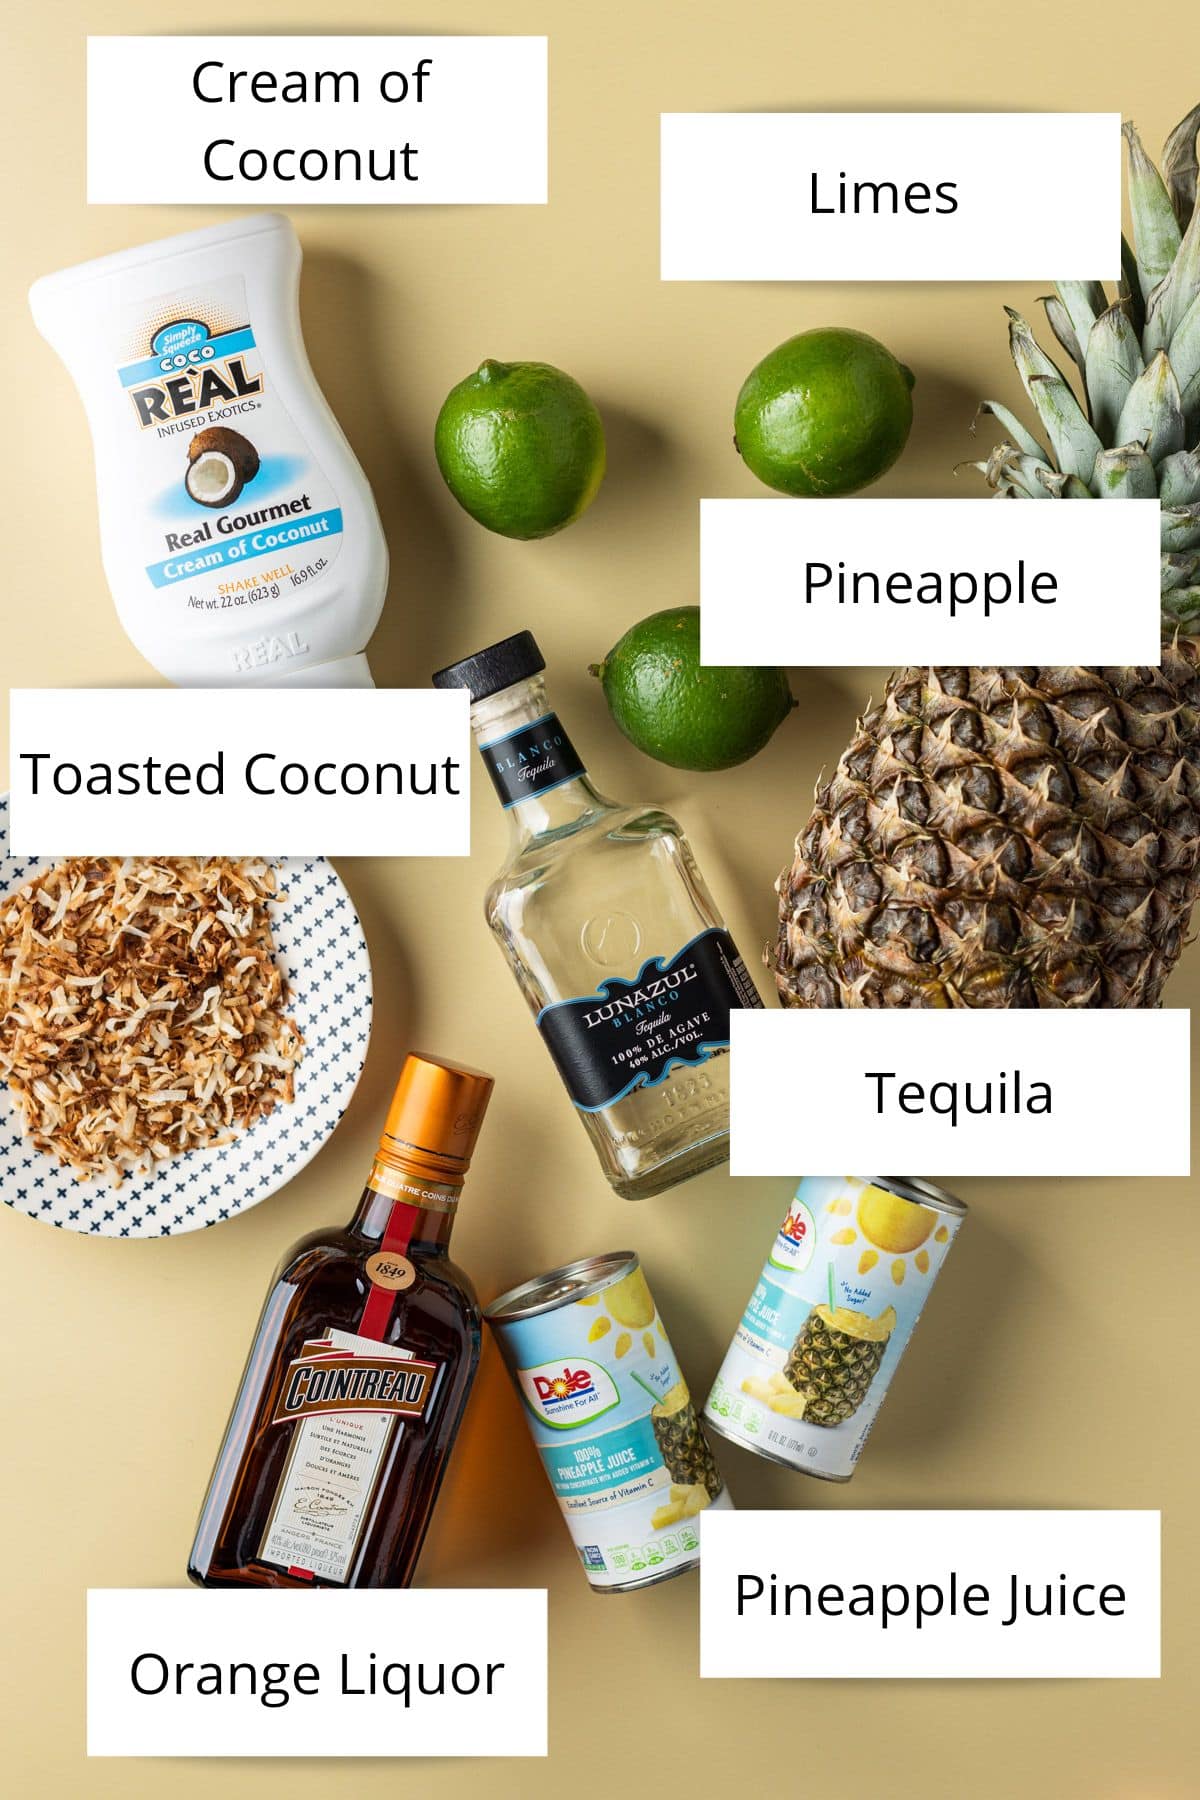 Overhead view of a bottle of cream of coconut, limes, pineapple, toasted coconut, tequila, cointreau and pineapple juice.